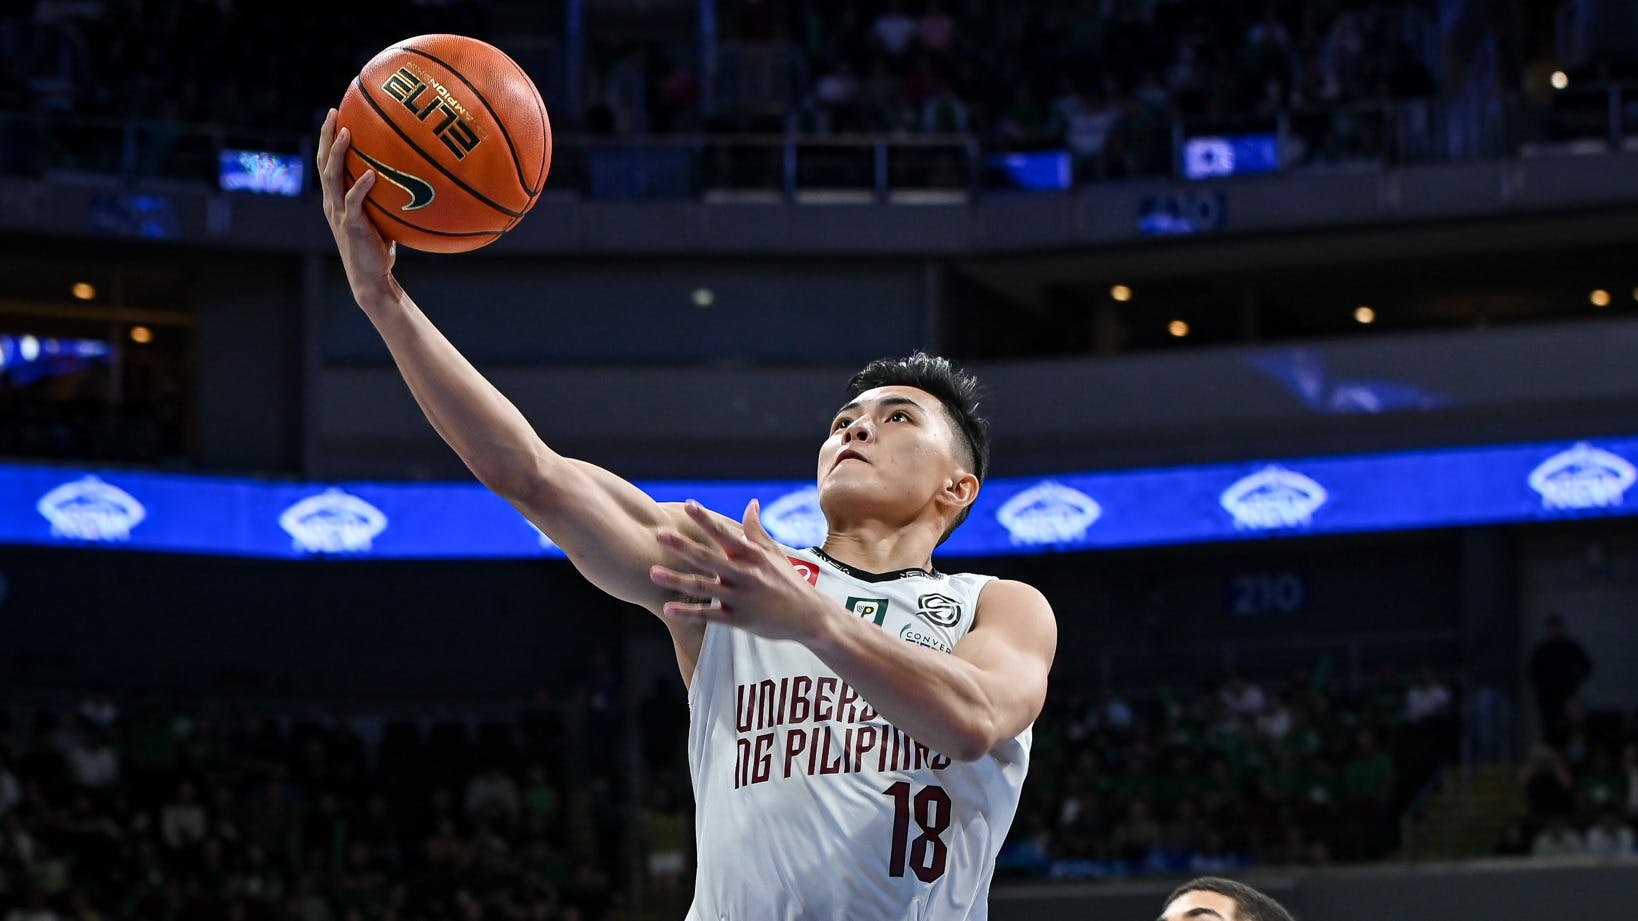 Harold Alarcon, UP stay focused on championship goal despite dominant Game 1 win over La Salle